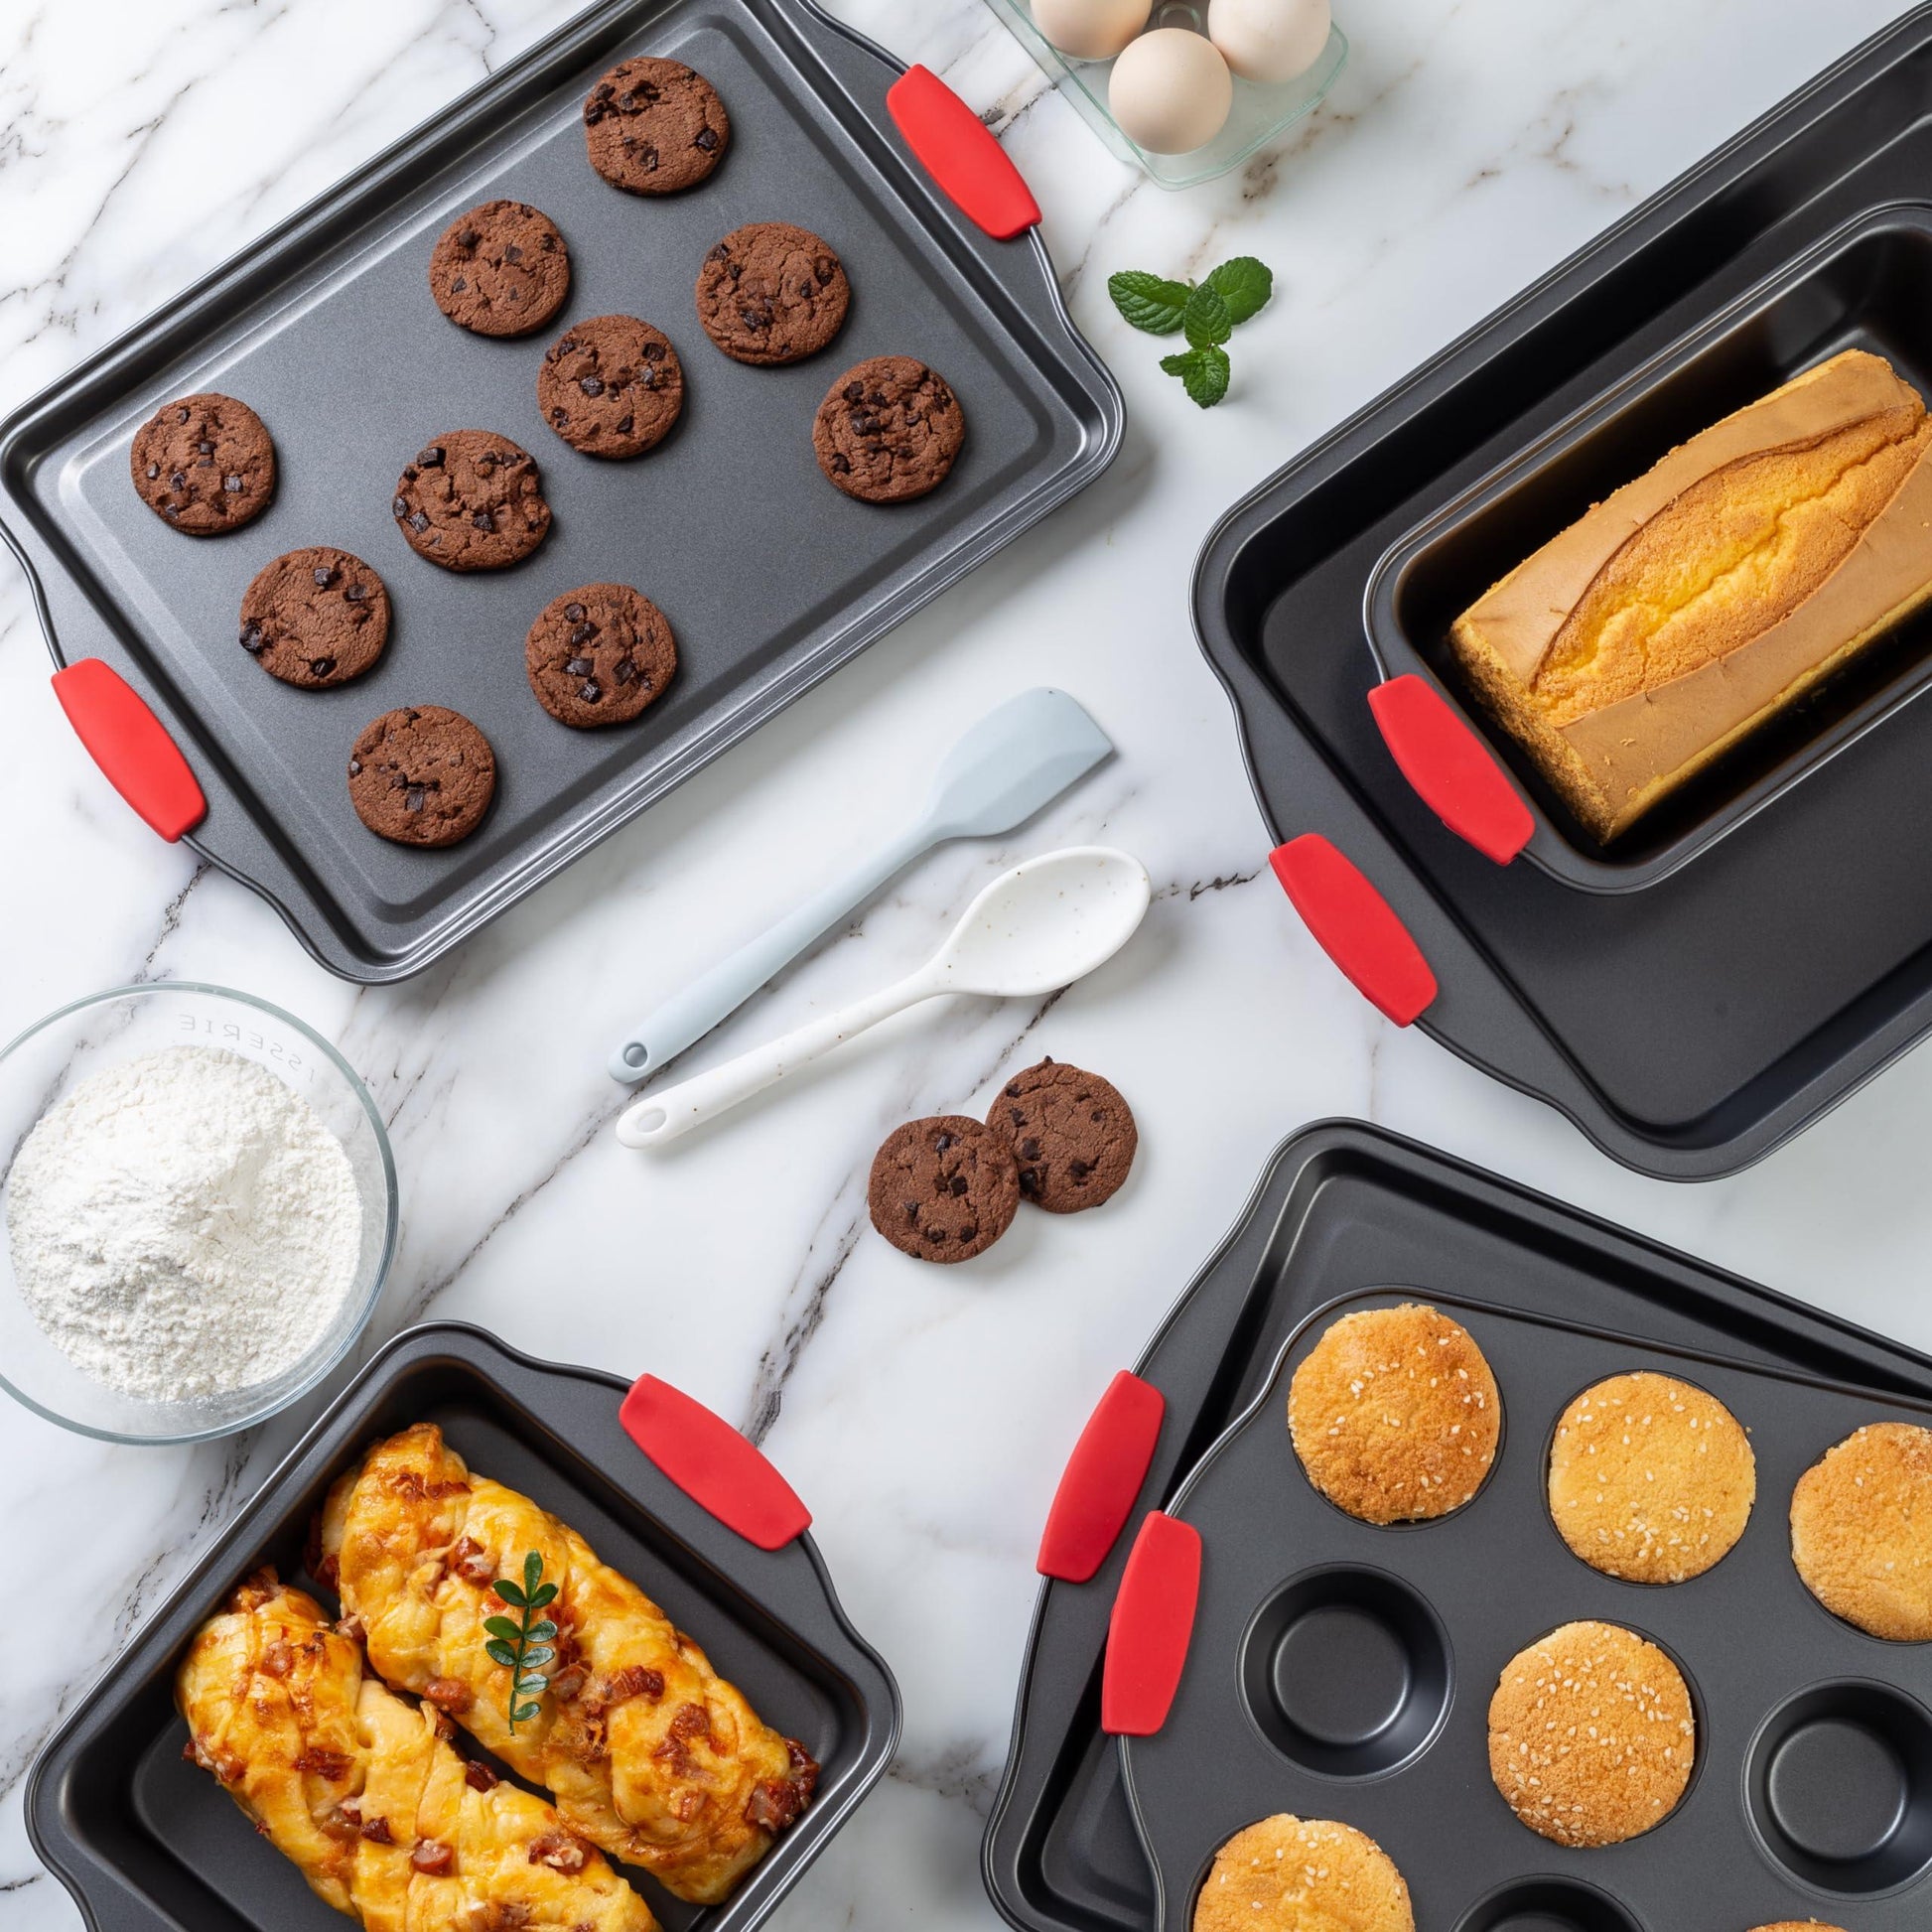 Country Kitchen 10-Piece Nonstick Stackable Bakeware Set - PFOA, PFOS, PTFE Free Baking Tray Set w/Non-Stick Coating, 450°F Oven Safe, Round Cake, Loaf, Muffin, Wide/Square Pans, Cookie Sheet - CookCave